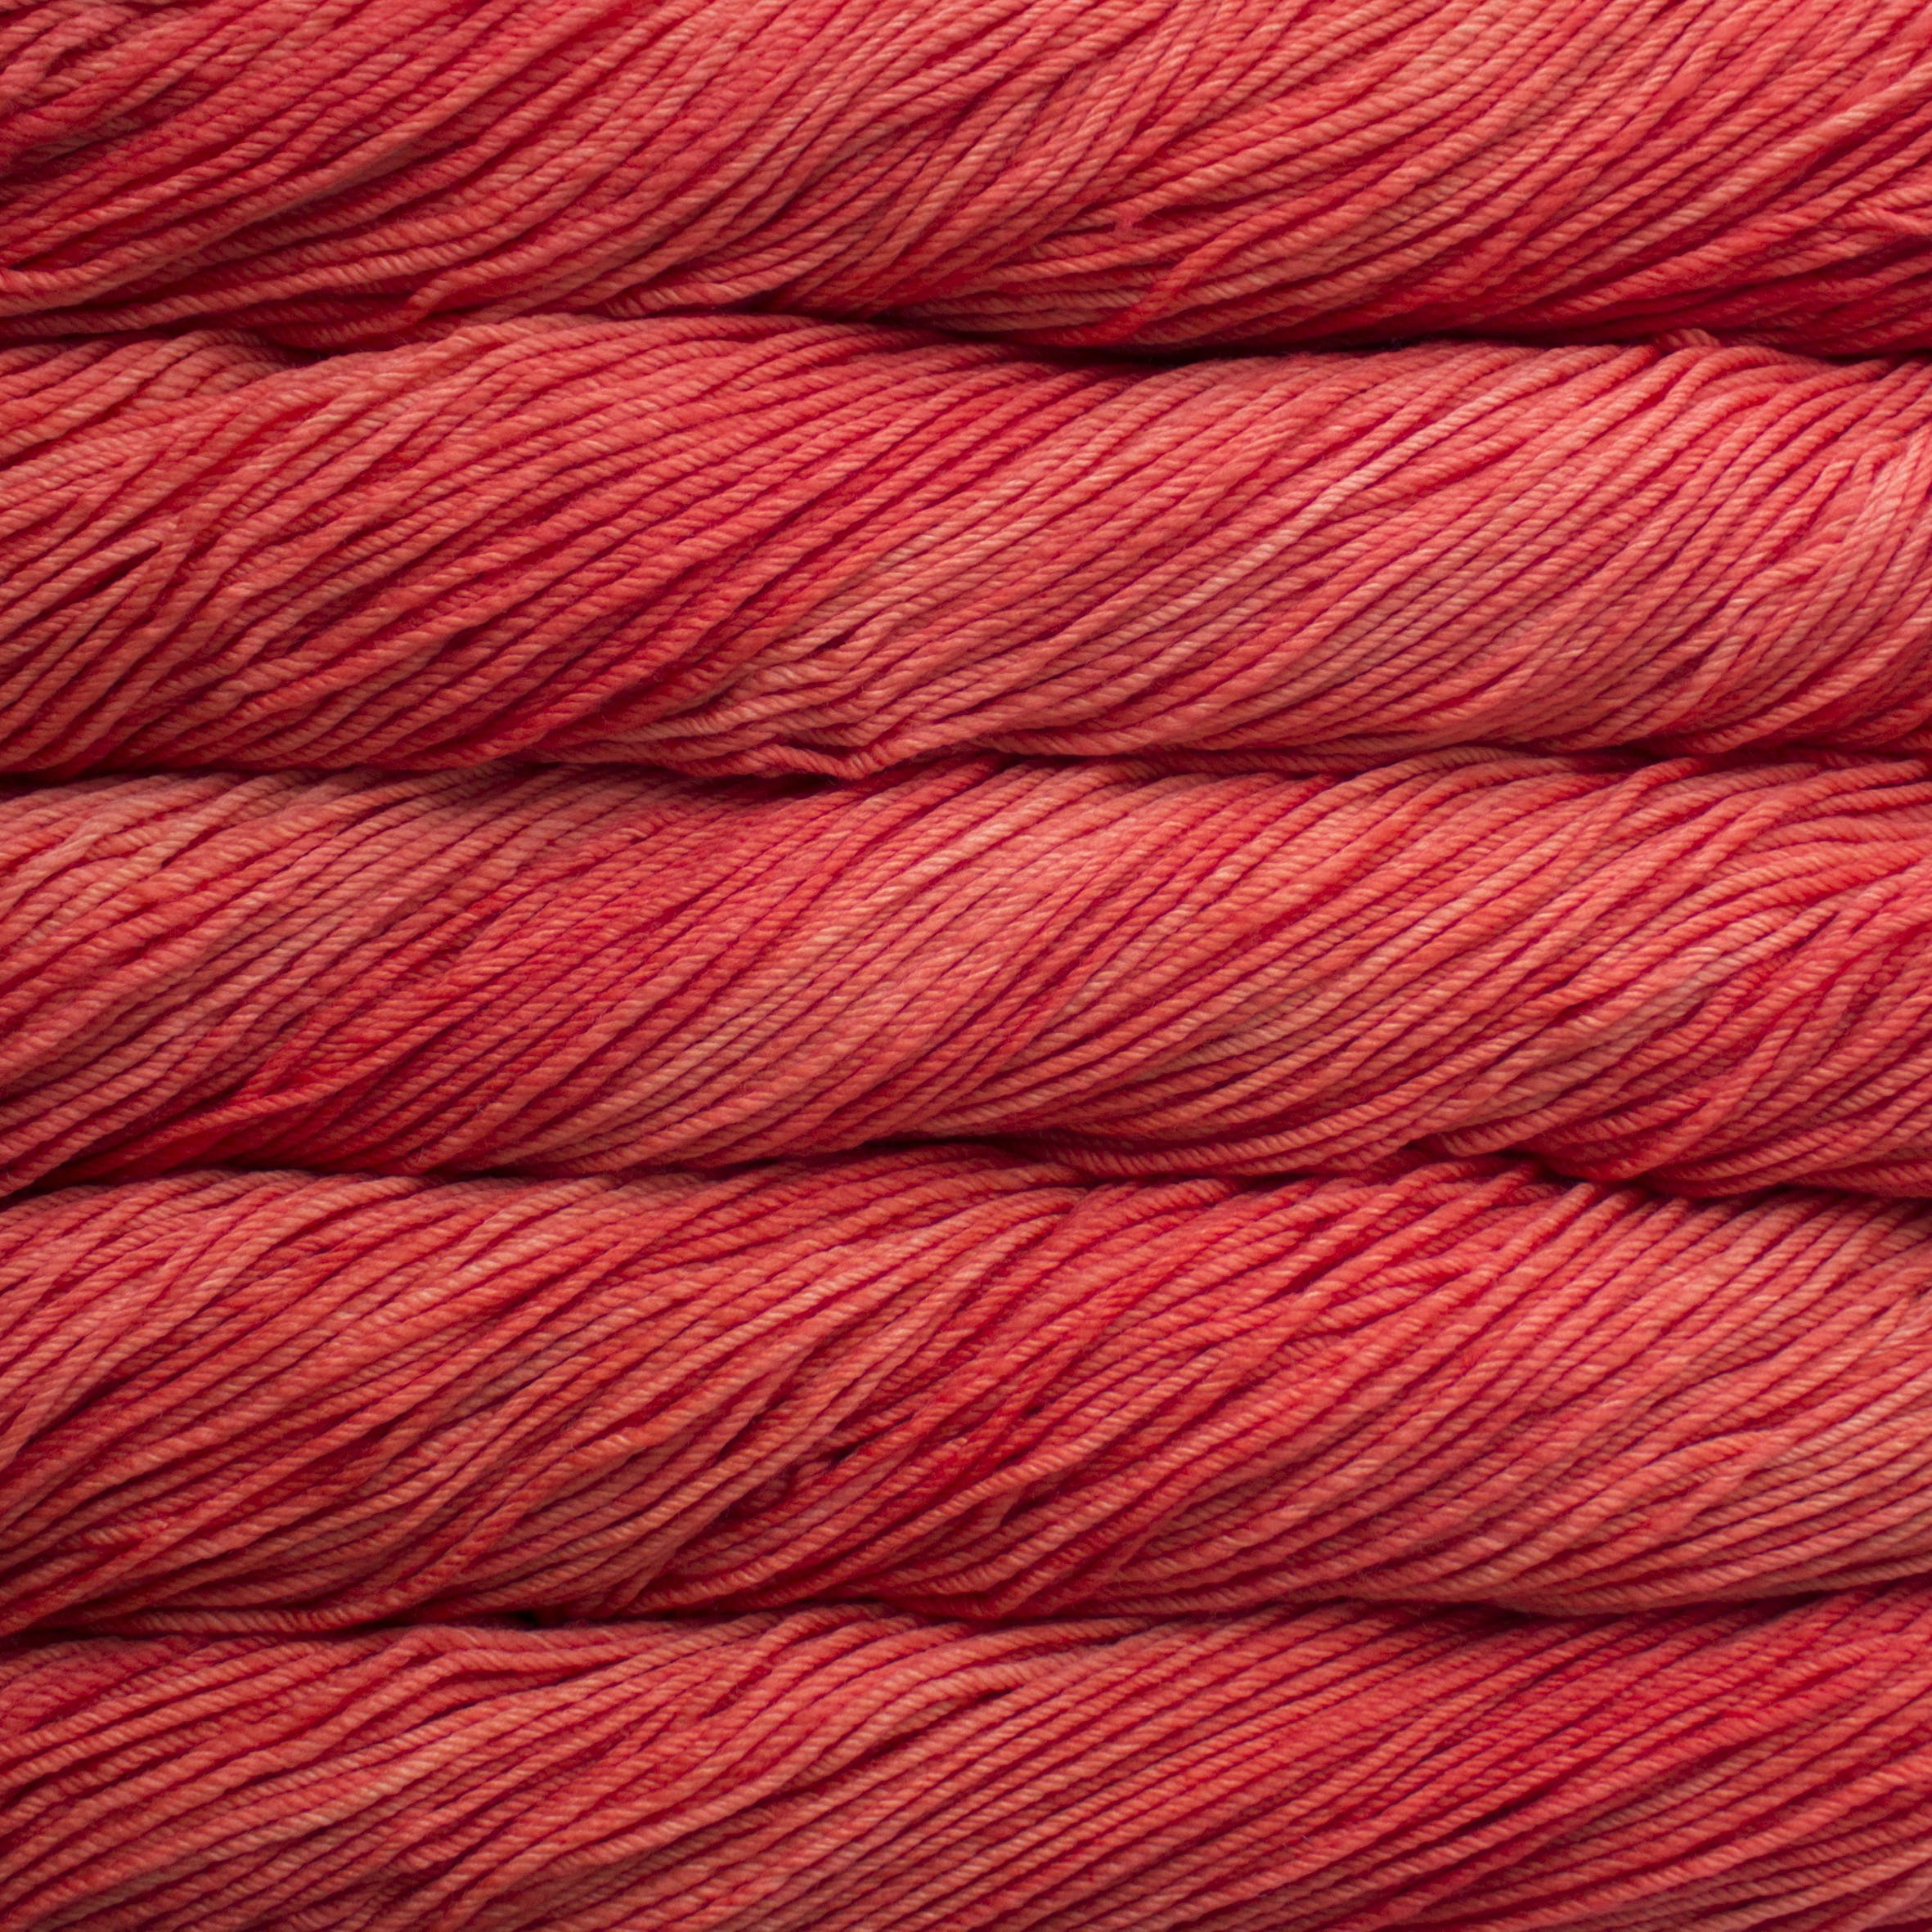 Skein of Malabrigo Rios Worsted weight yarn in the color Living Coral (Red) for knitting and crocheting.